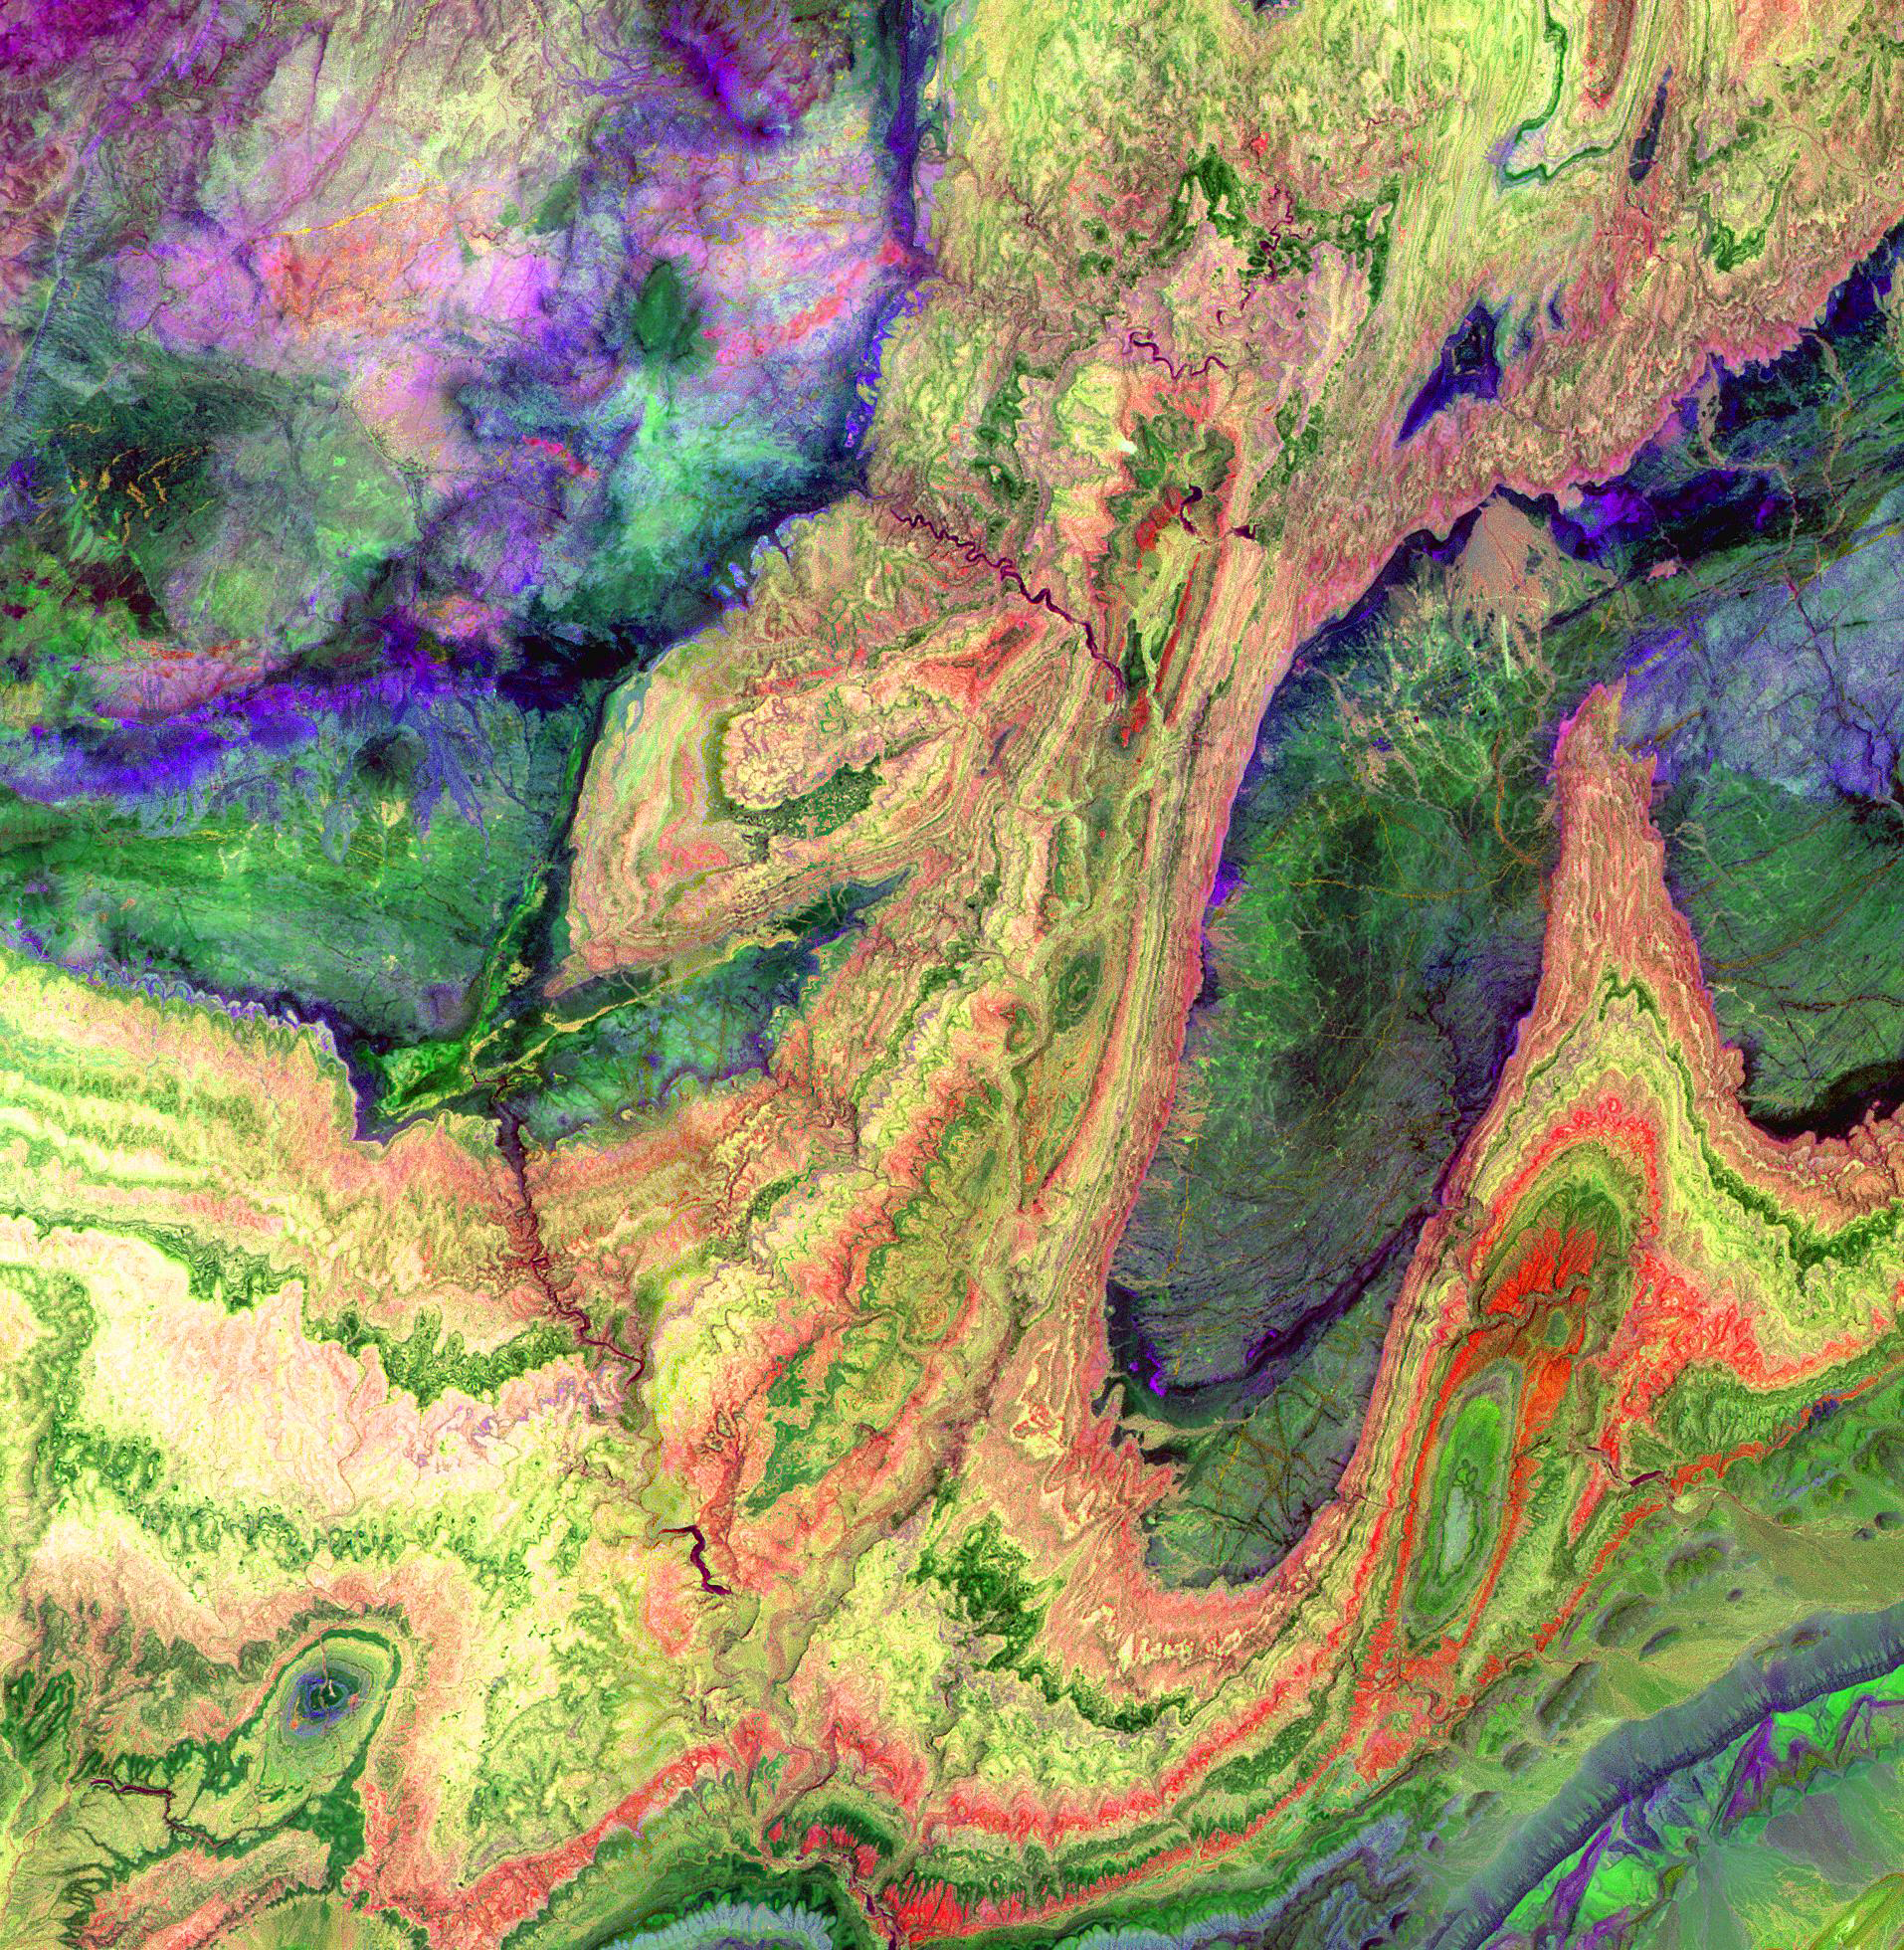 The Anti-Atlas Mountains, Morocco, formed as a result of the collision of the African and Eurasian tectonic plates about 80 million years ago. In this image, short wavelength infrared bands are combined to dramatically highlight the different rock types, and illustrate the complex folding. The yellowish, orange and green areas are limestones, sandstones and gypsum; the dark blue and green areas are underlying granitic rocks. The image was acquired on June 13, 2001.